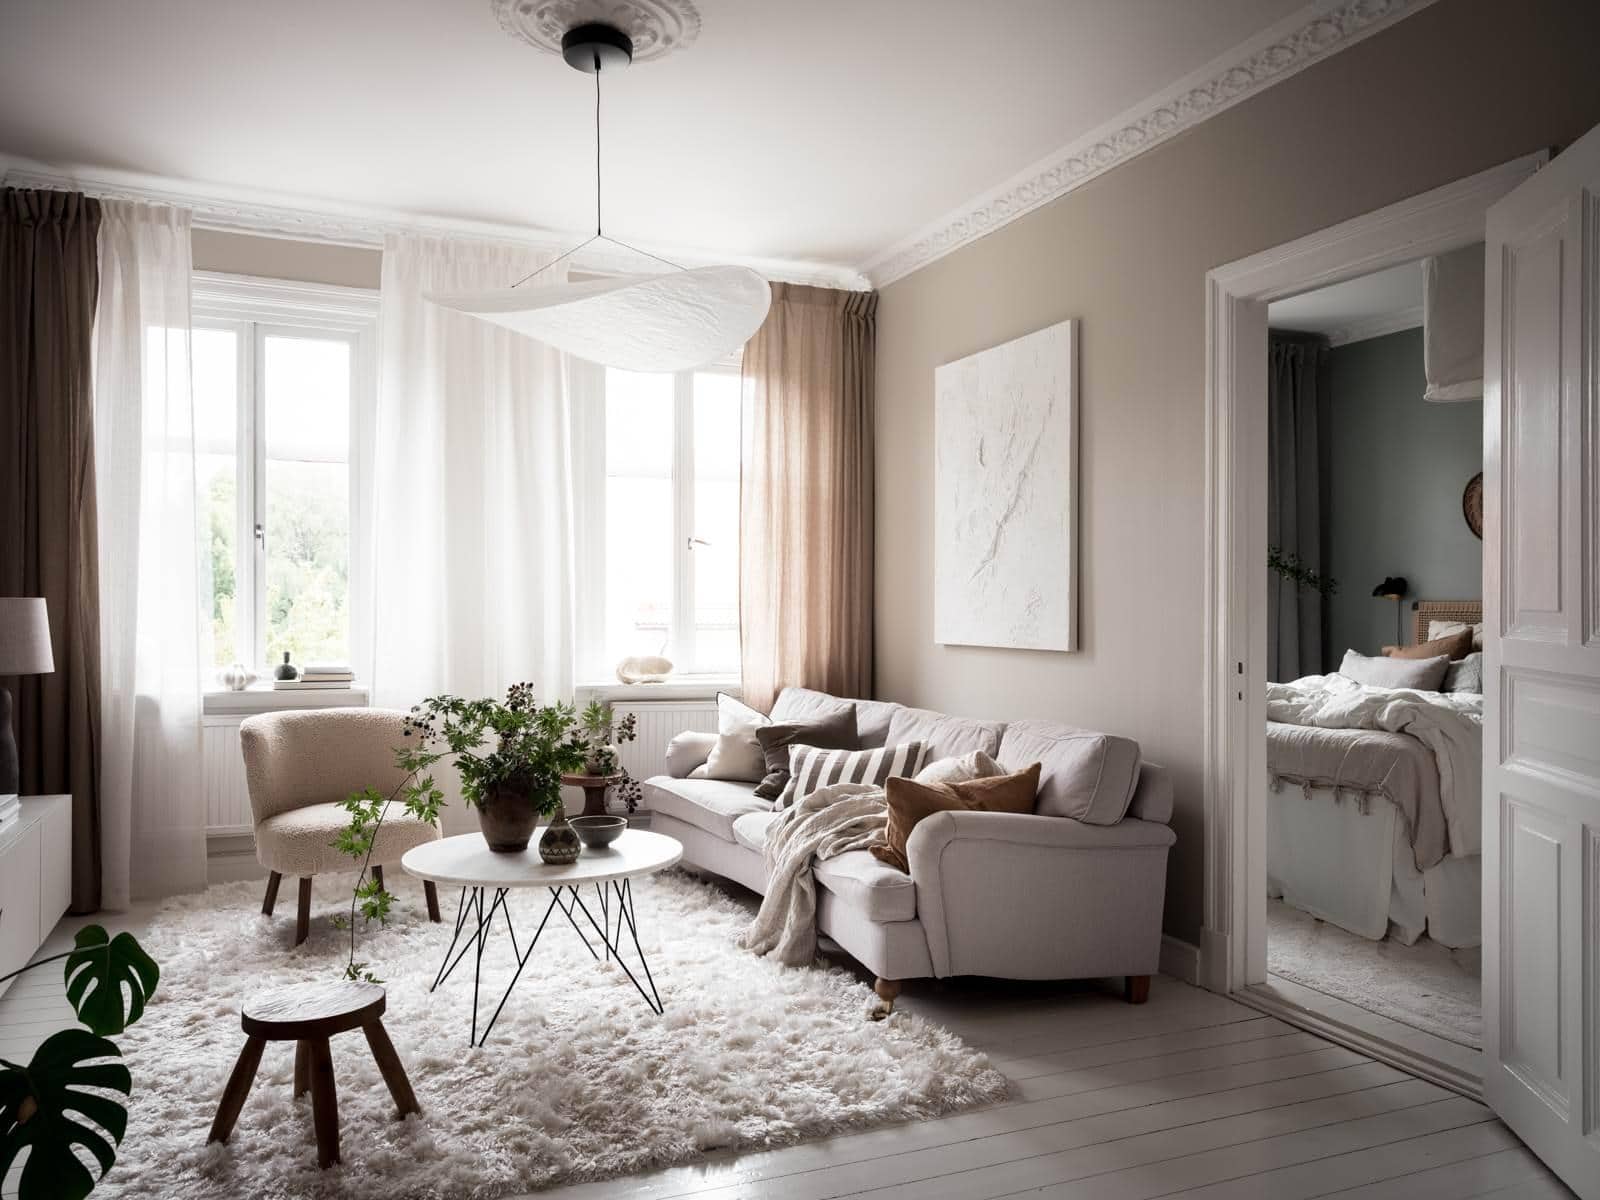 A beige living room and a sage green bedroom combined - COCO LAPINE ...